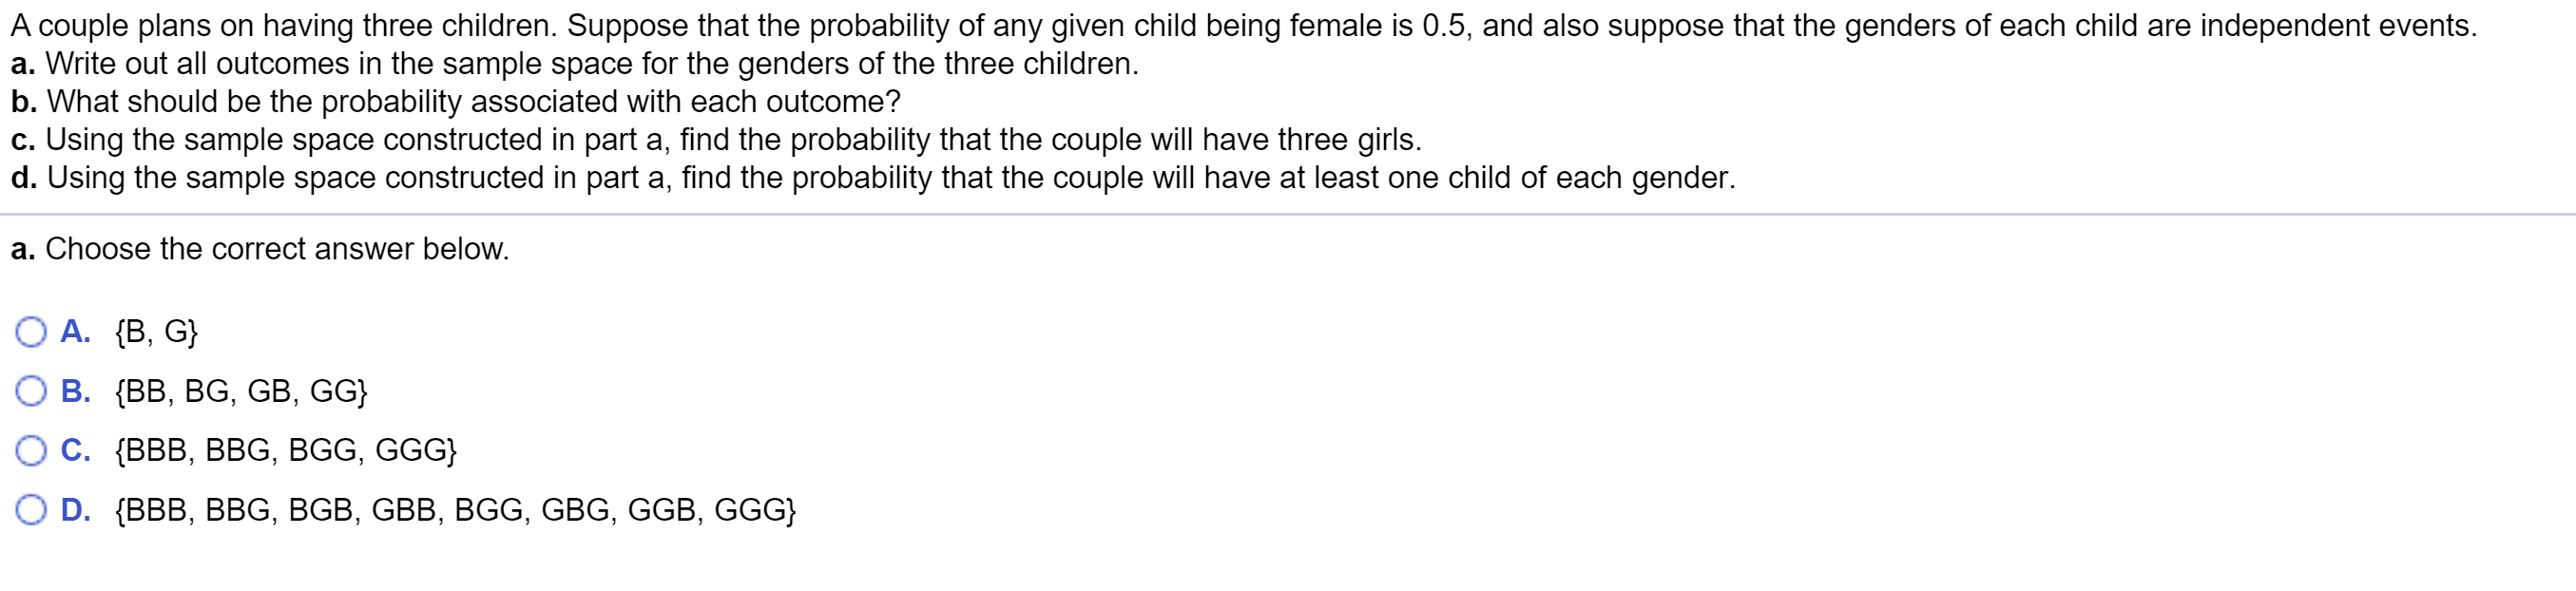 A couple plans on having three children. Suppose that the probability of any given child being female is 0.5, and also suppose that the genders of each child are independent events.
a. Write out all outcomes in the sample space for the genders of the three children.
o. What should be the probability associated with each outcome?
c. Using the sample space constructed in part a, find the probability that the couple will have three girls.
1. Using the sample space constructed in part a, find the probability that the couple will have at least one child of each gender.
a. Choose the correct answer below.
О А. {В, G}
ОВ. {В, BG, GB, GG}
ОС. (В, ВВG, BGG, GGG}
O D. {BBB, BBG, BGB, GBB, BGG, GBG, GGB, GGG}
